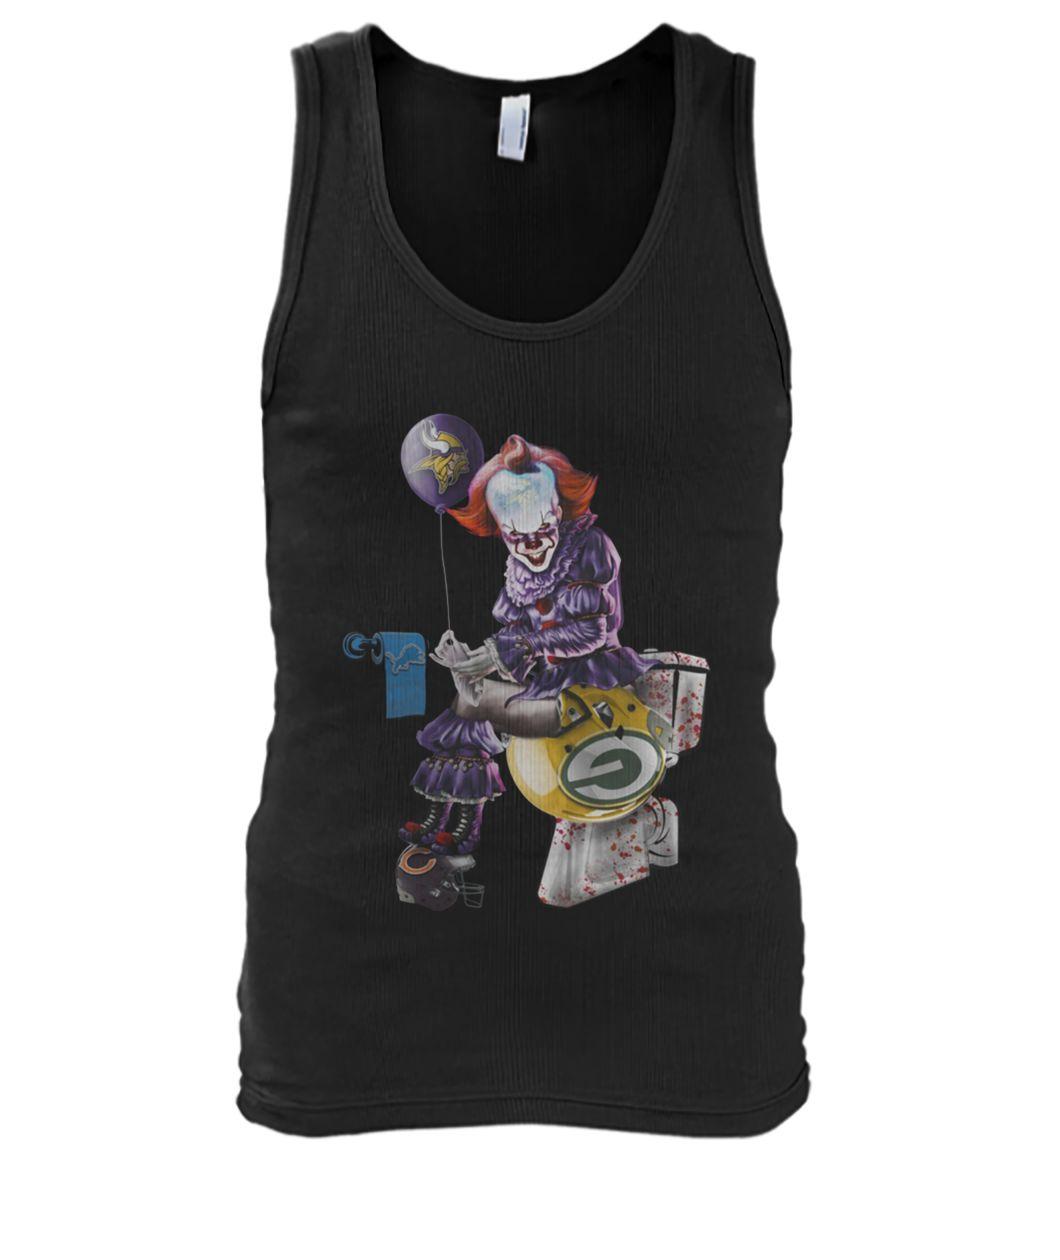 It pennywise minnesota vikings sitting on green bay packers tank top